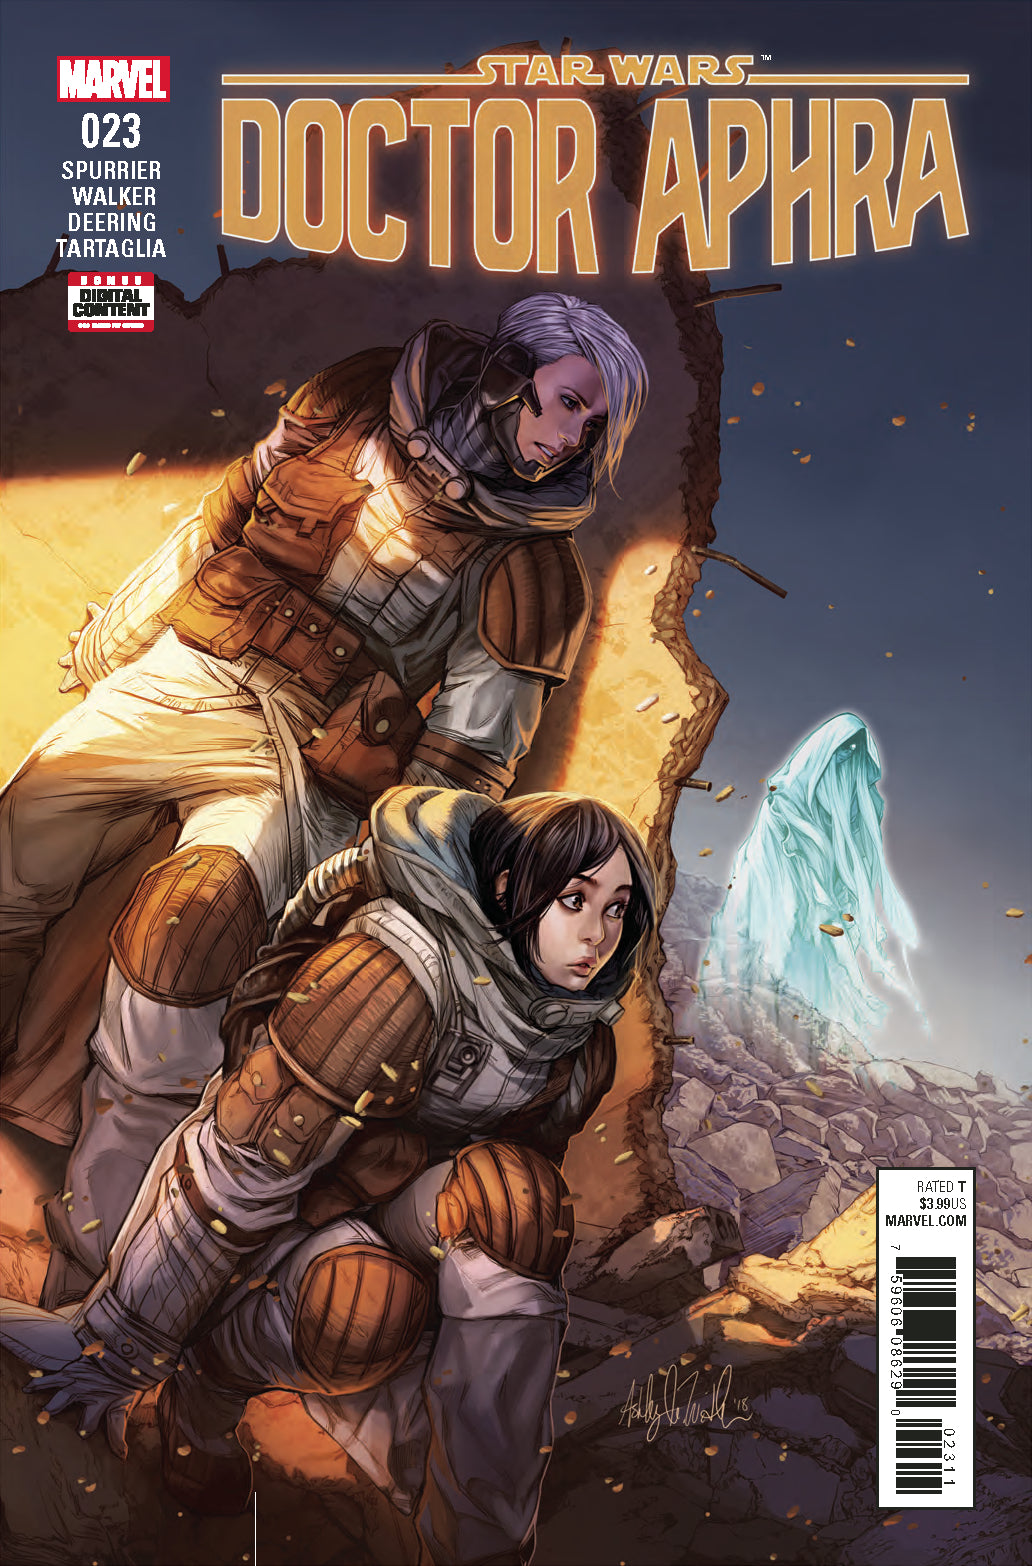 Photo of Star Wars Doctor Aphra Issue 23 comic sold by Stronghold Collectibles